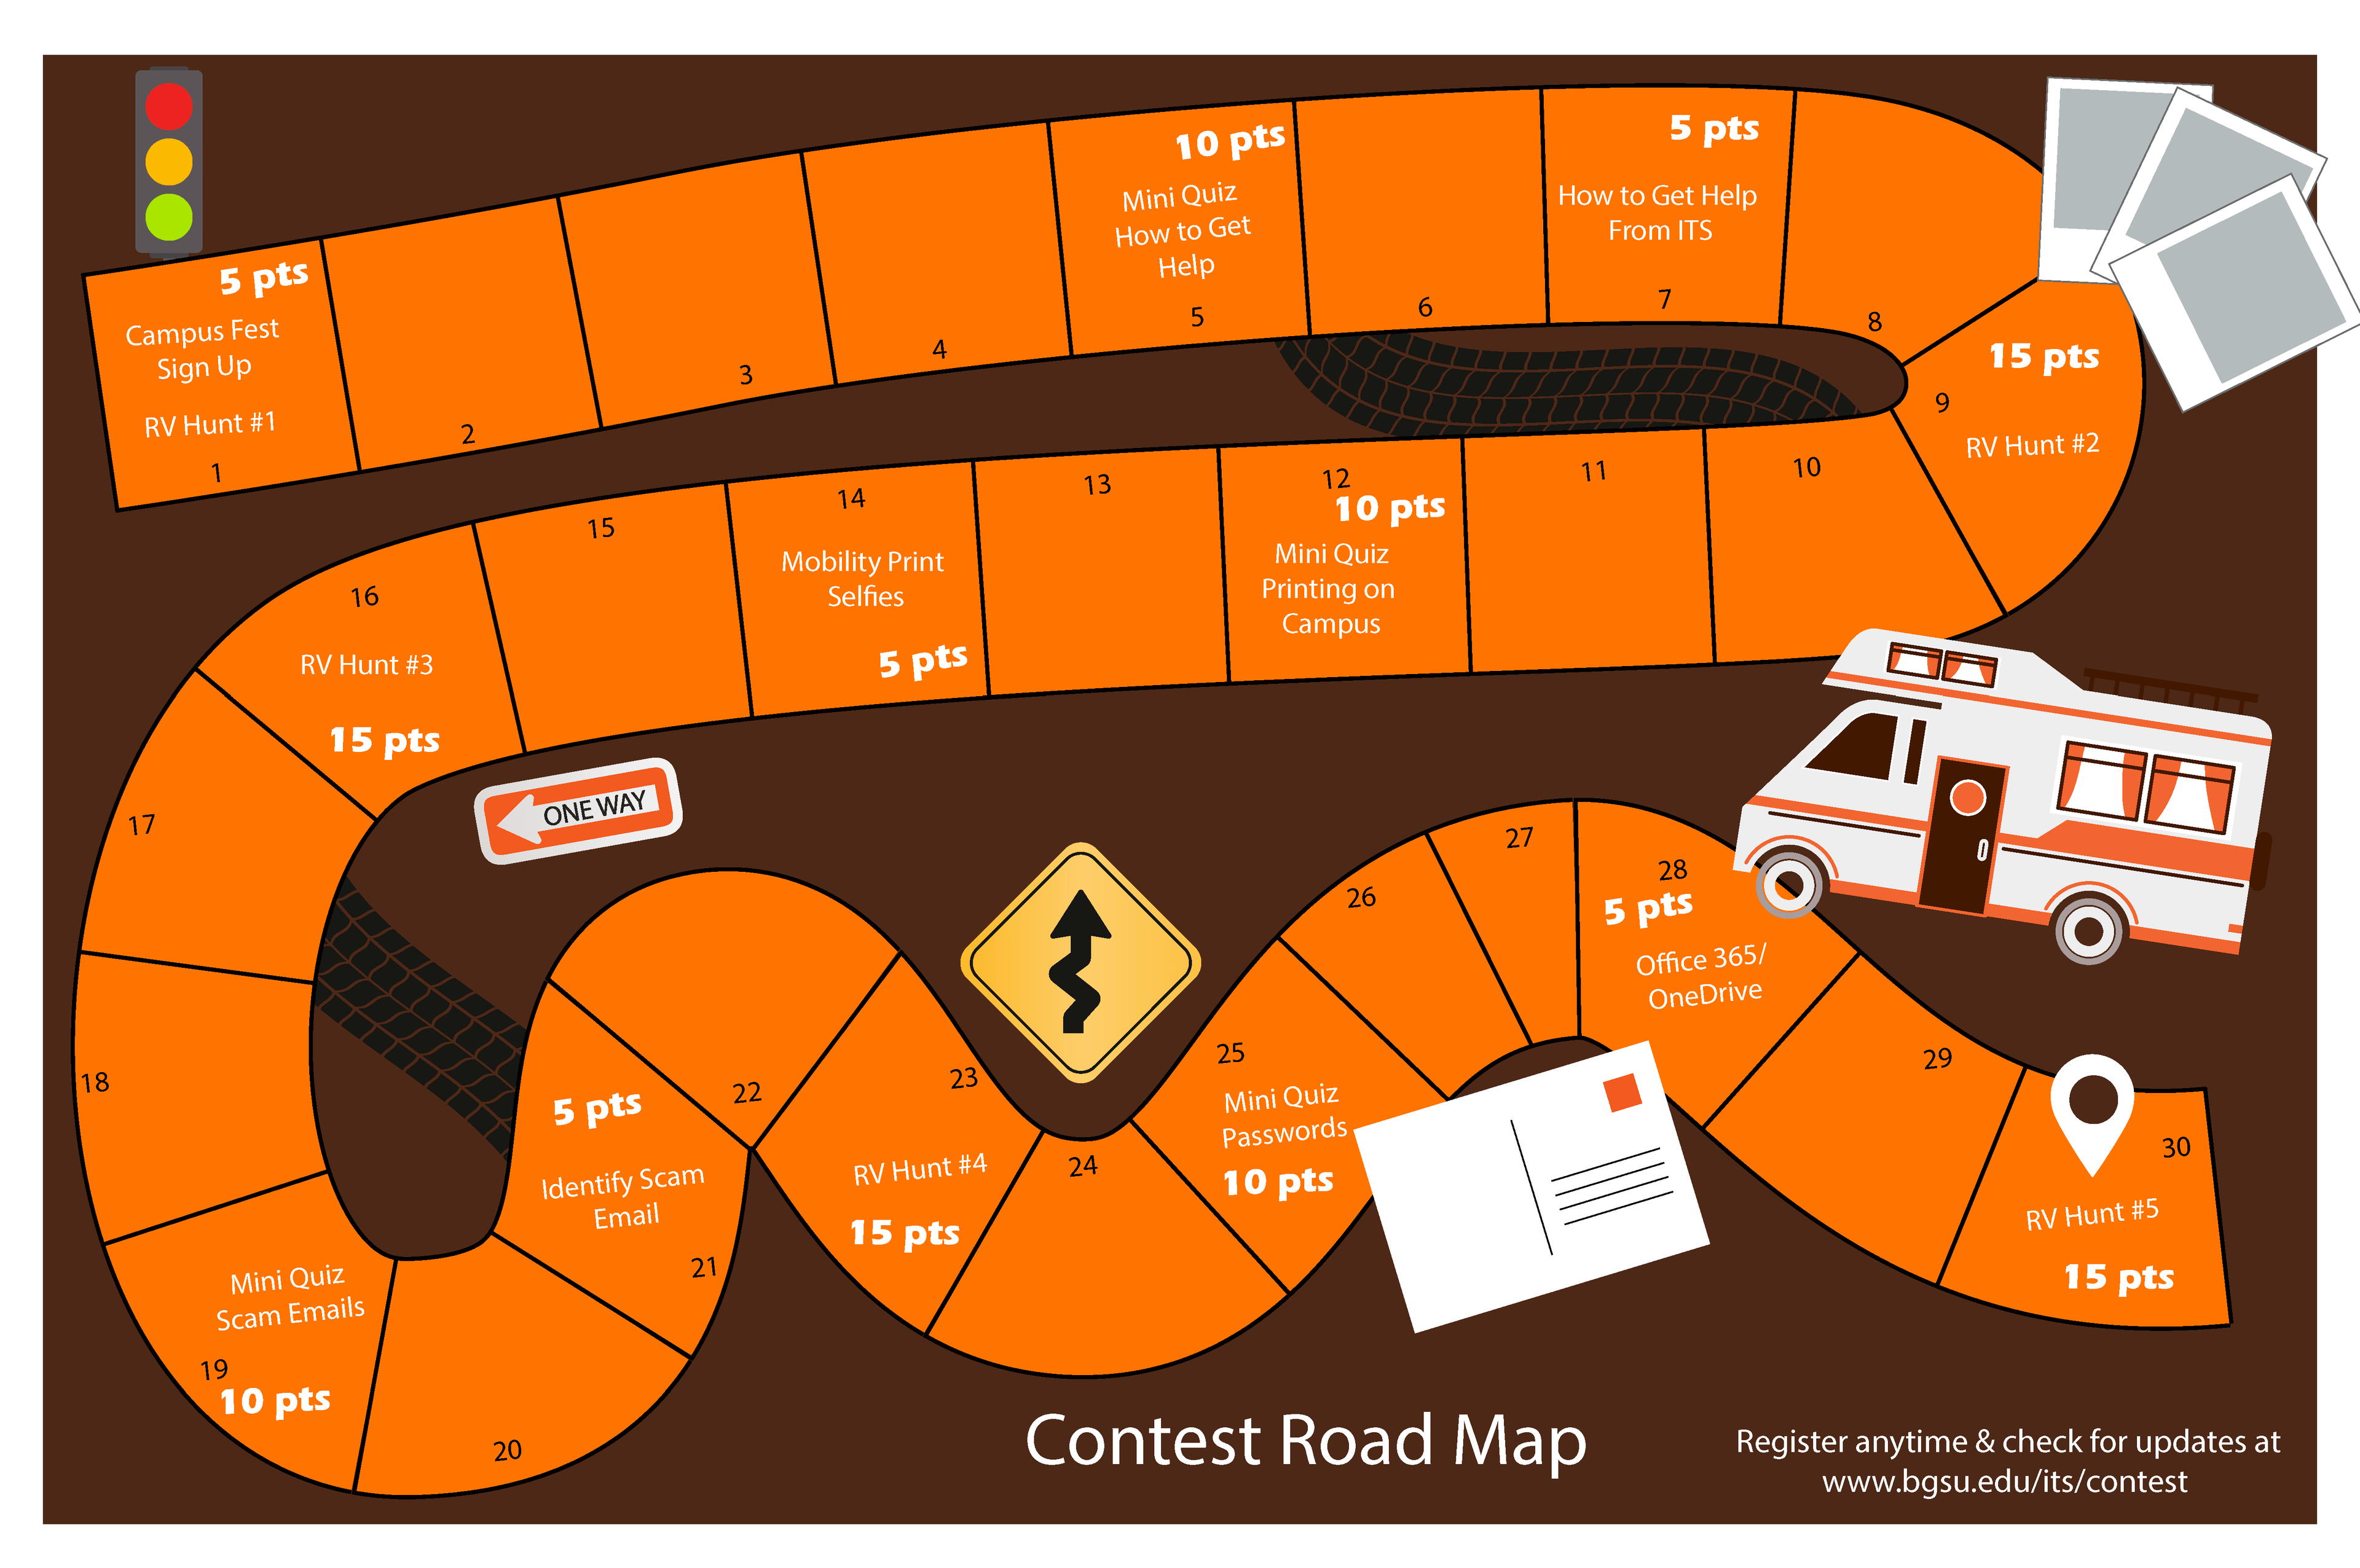 Road map image with orange board road and contest detail annotations. 30 total spaces.